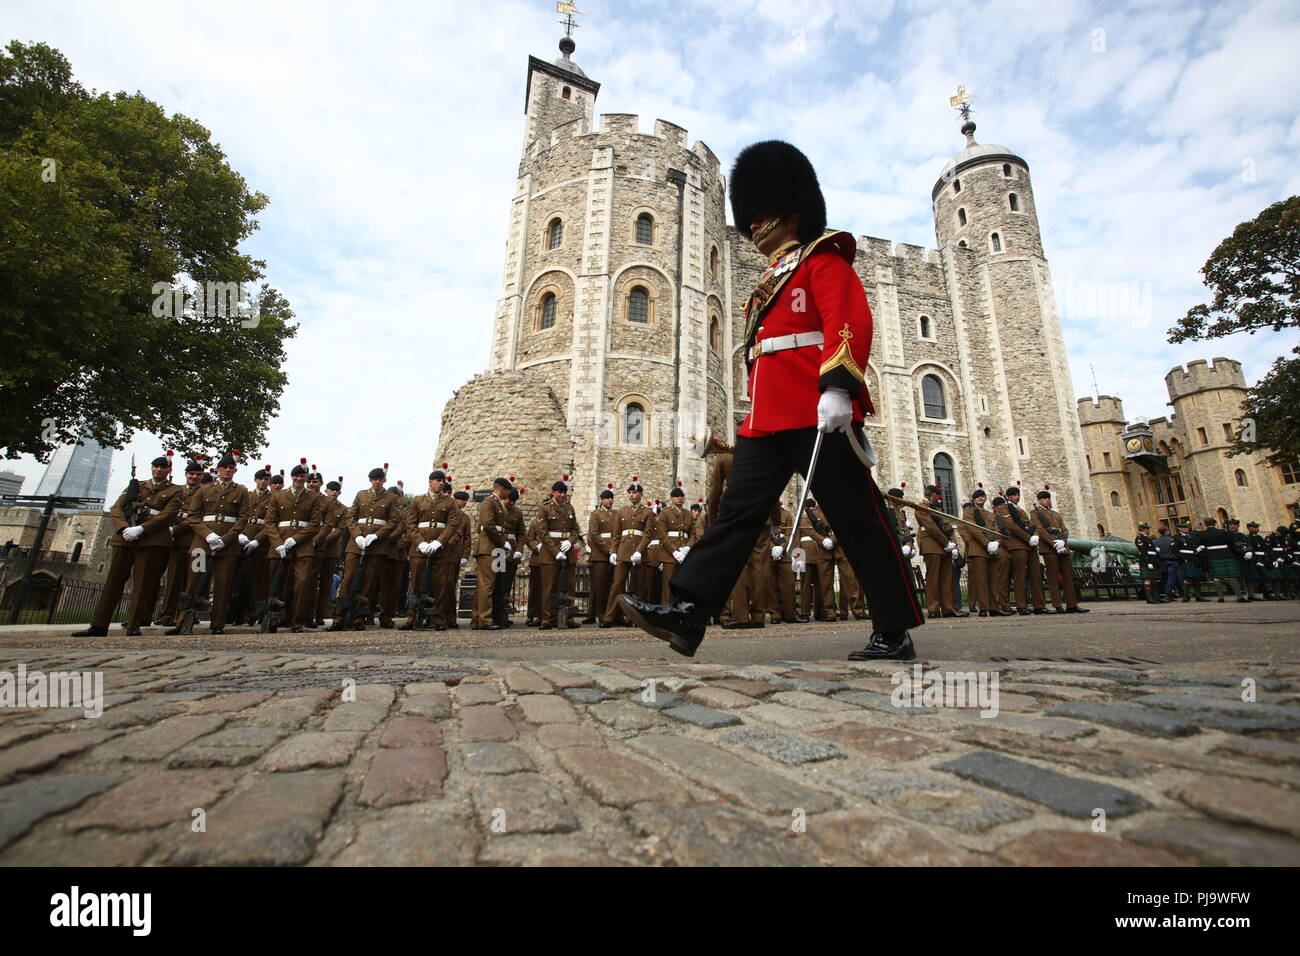 Members of the Royal Regiment of Fusiliers wait to set of from the Tower of London on a parade through the city of London to celebrate 50 years since their regiment was formed. Stock Photo